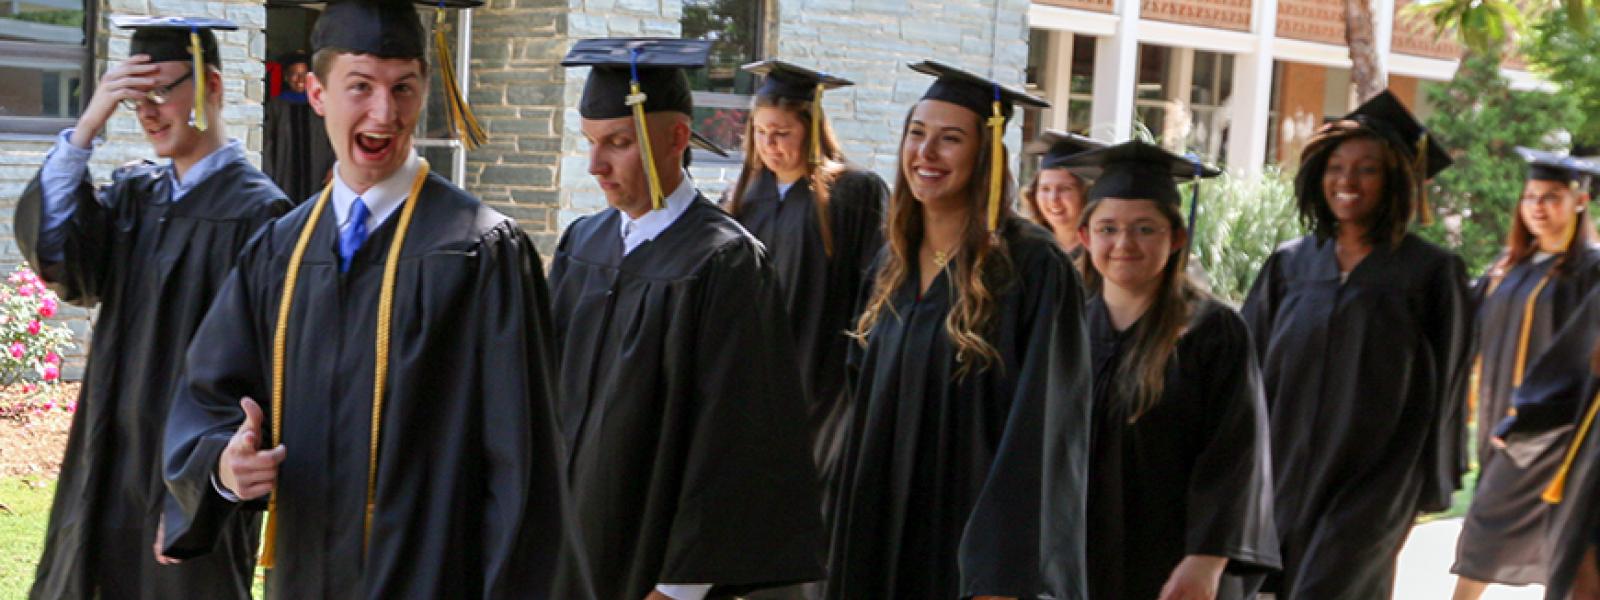 CIU Graduates head for the stage of Shortess Chapel at the May 2019 Commencement 